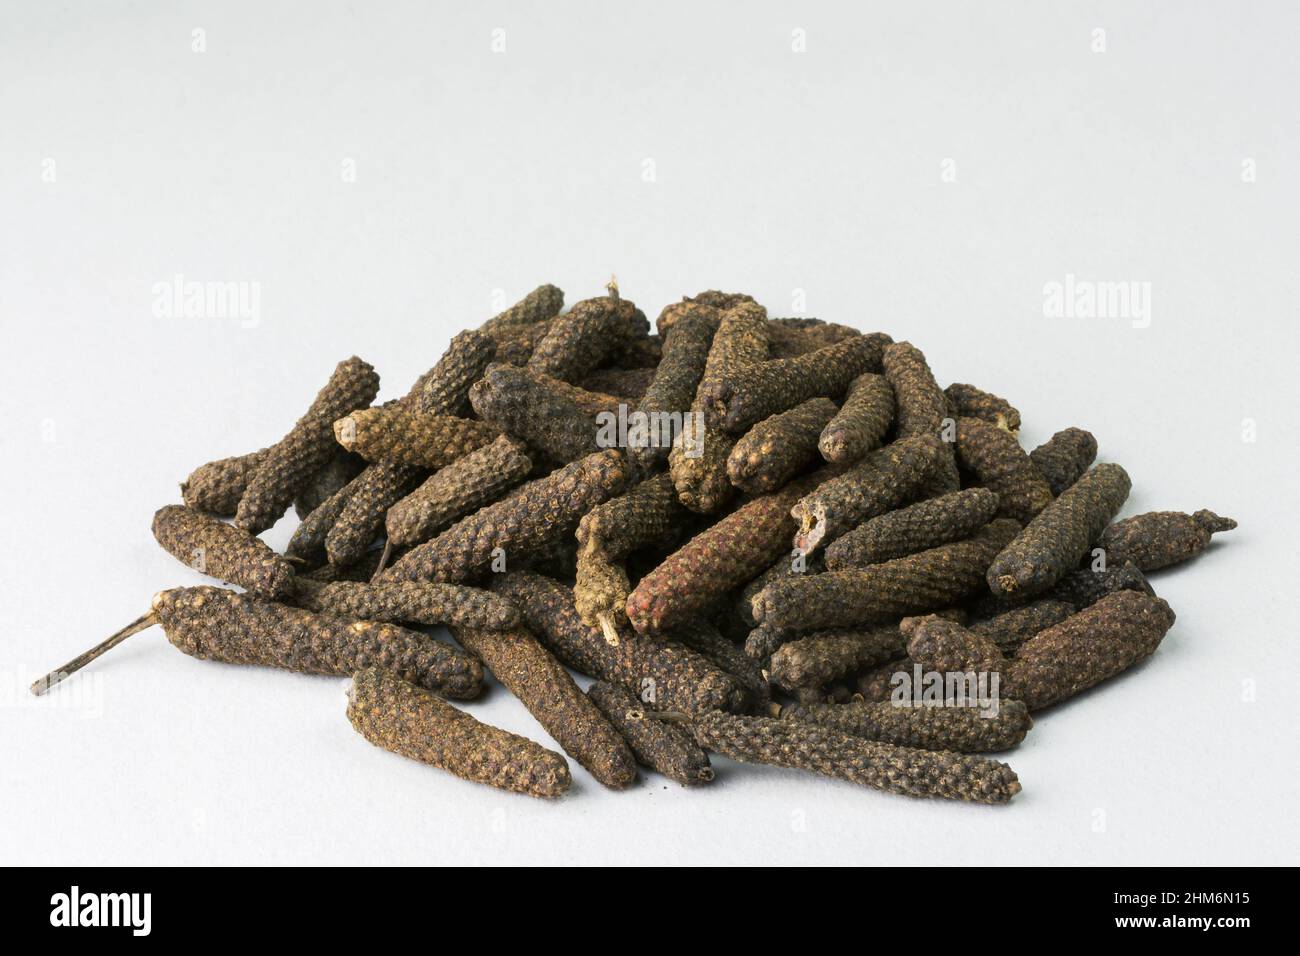 Pile of ripe Long peppers (Piper longum) Stock Photo